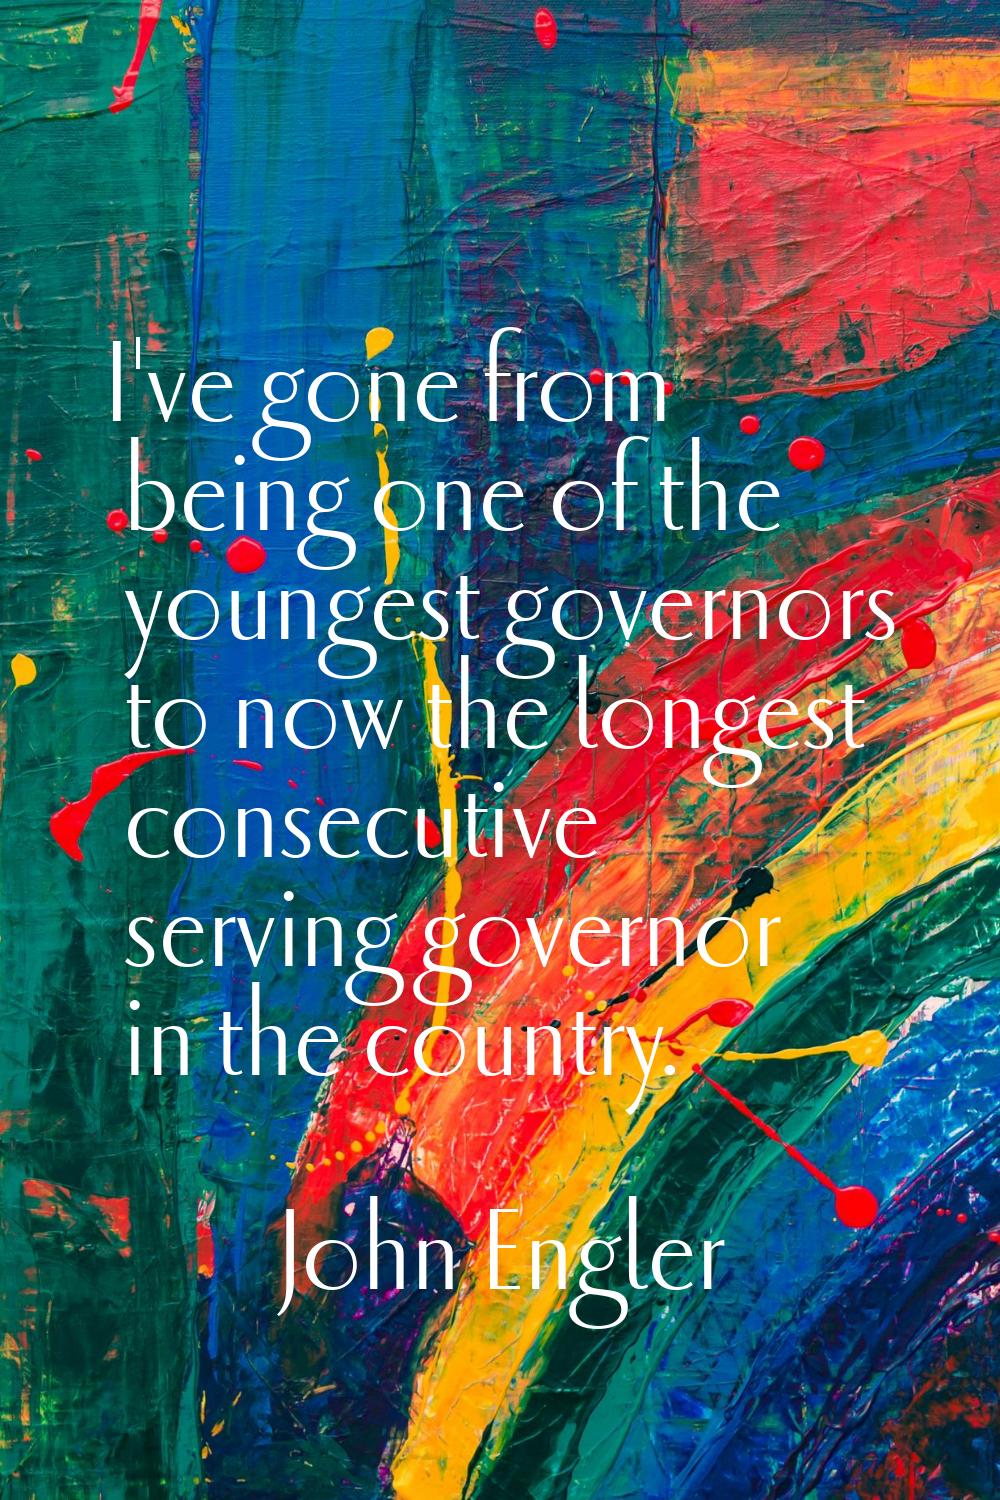 I've gone from being one of the youngest governors to now the longest consecutive serving governor 